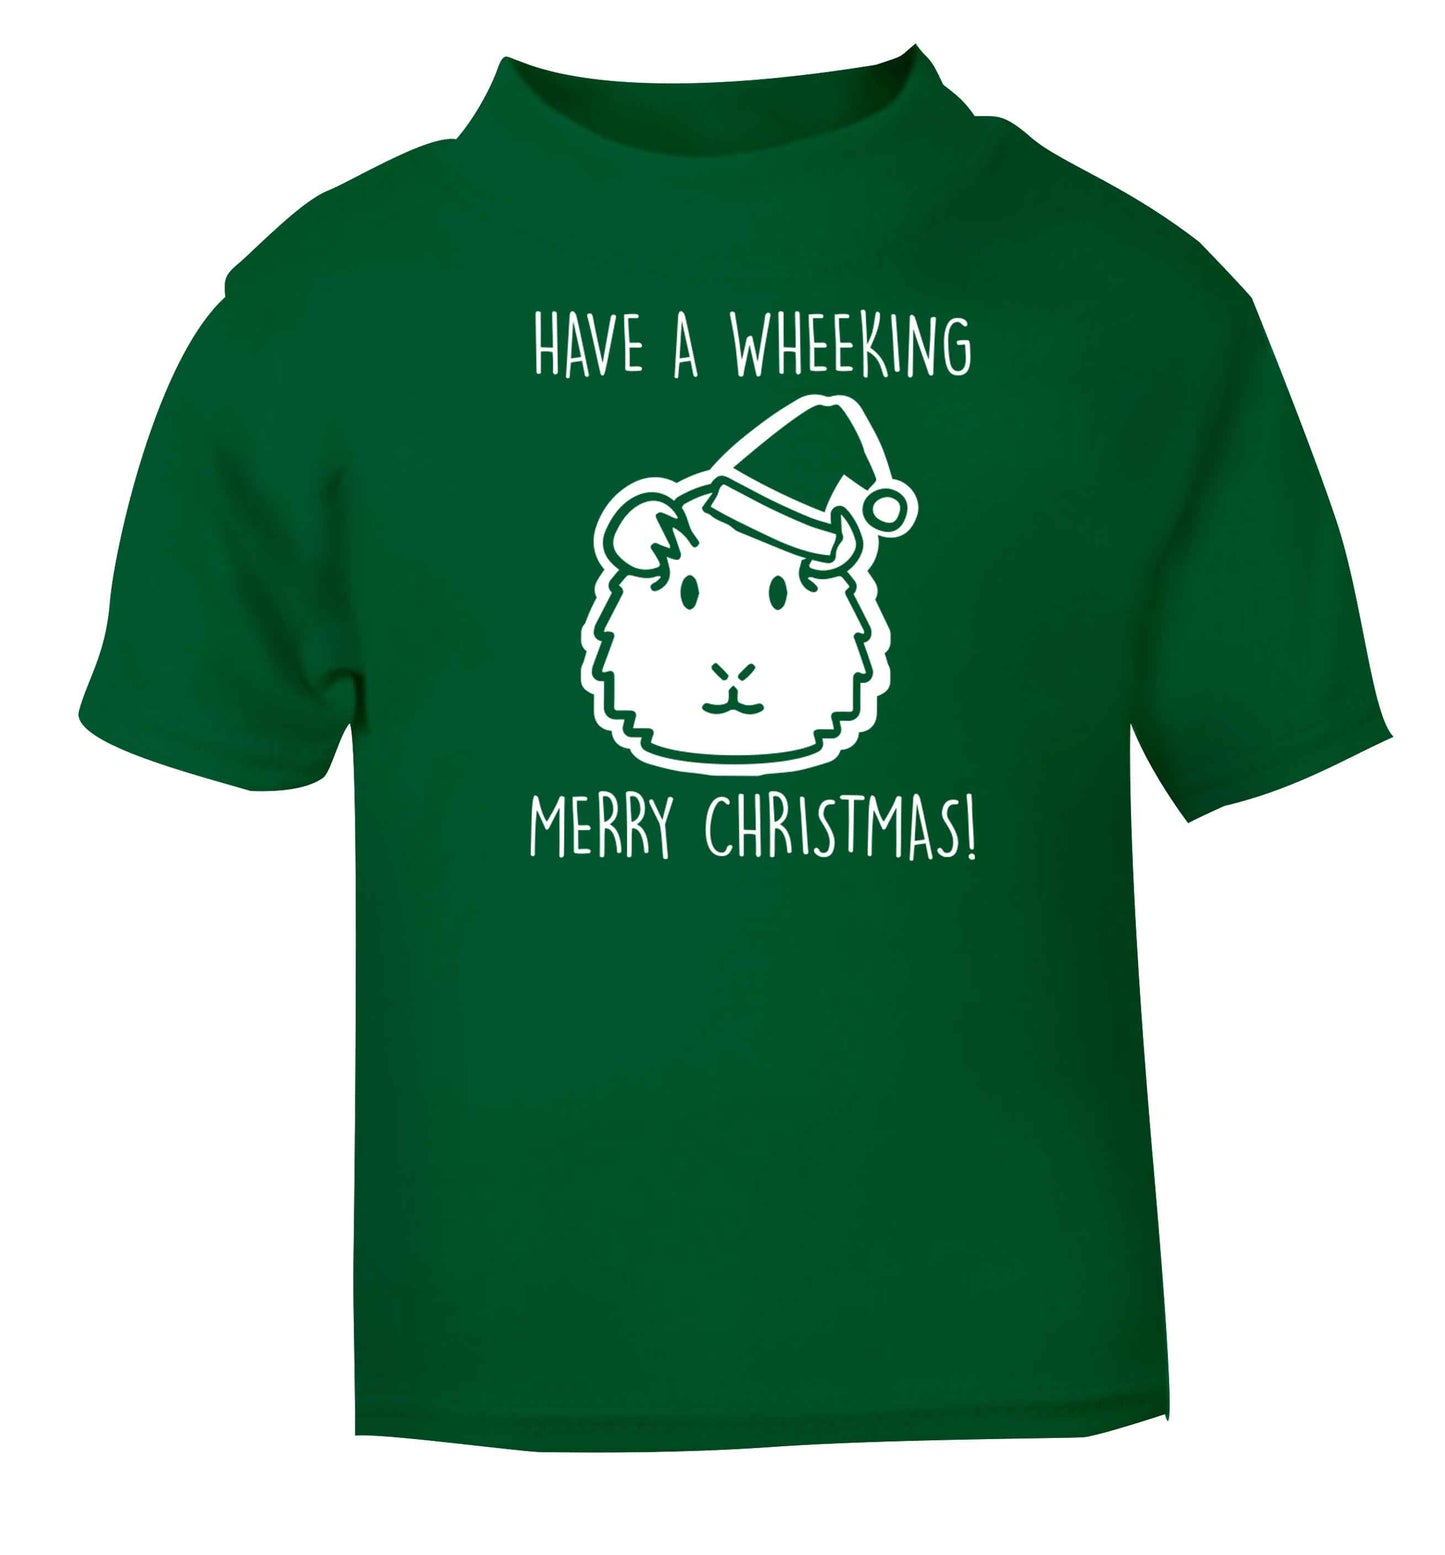 Have a wheeking merry Christmas green baby toddler Tshirt 2 Years